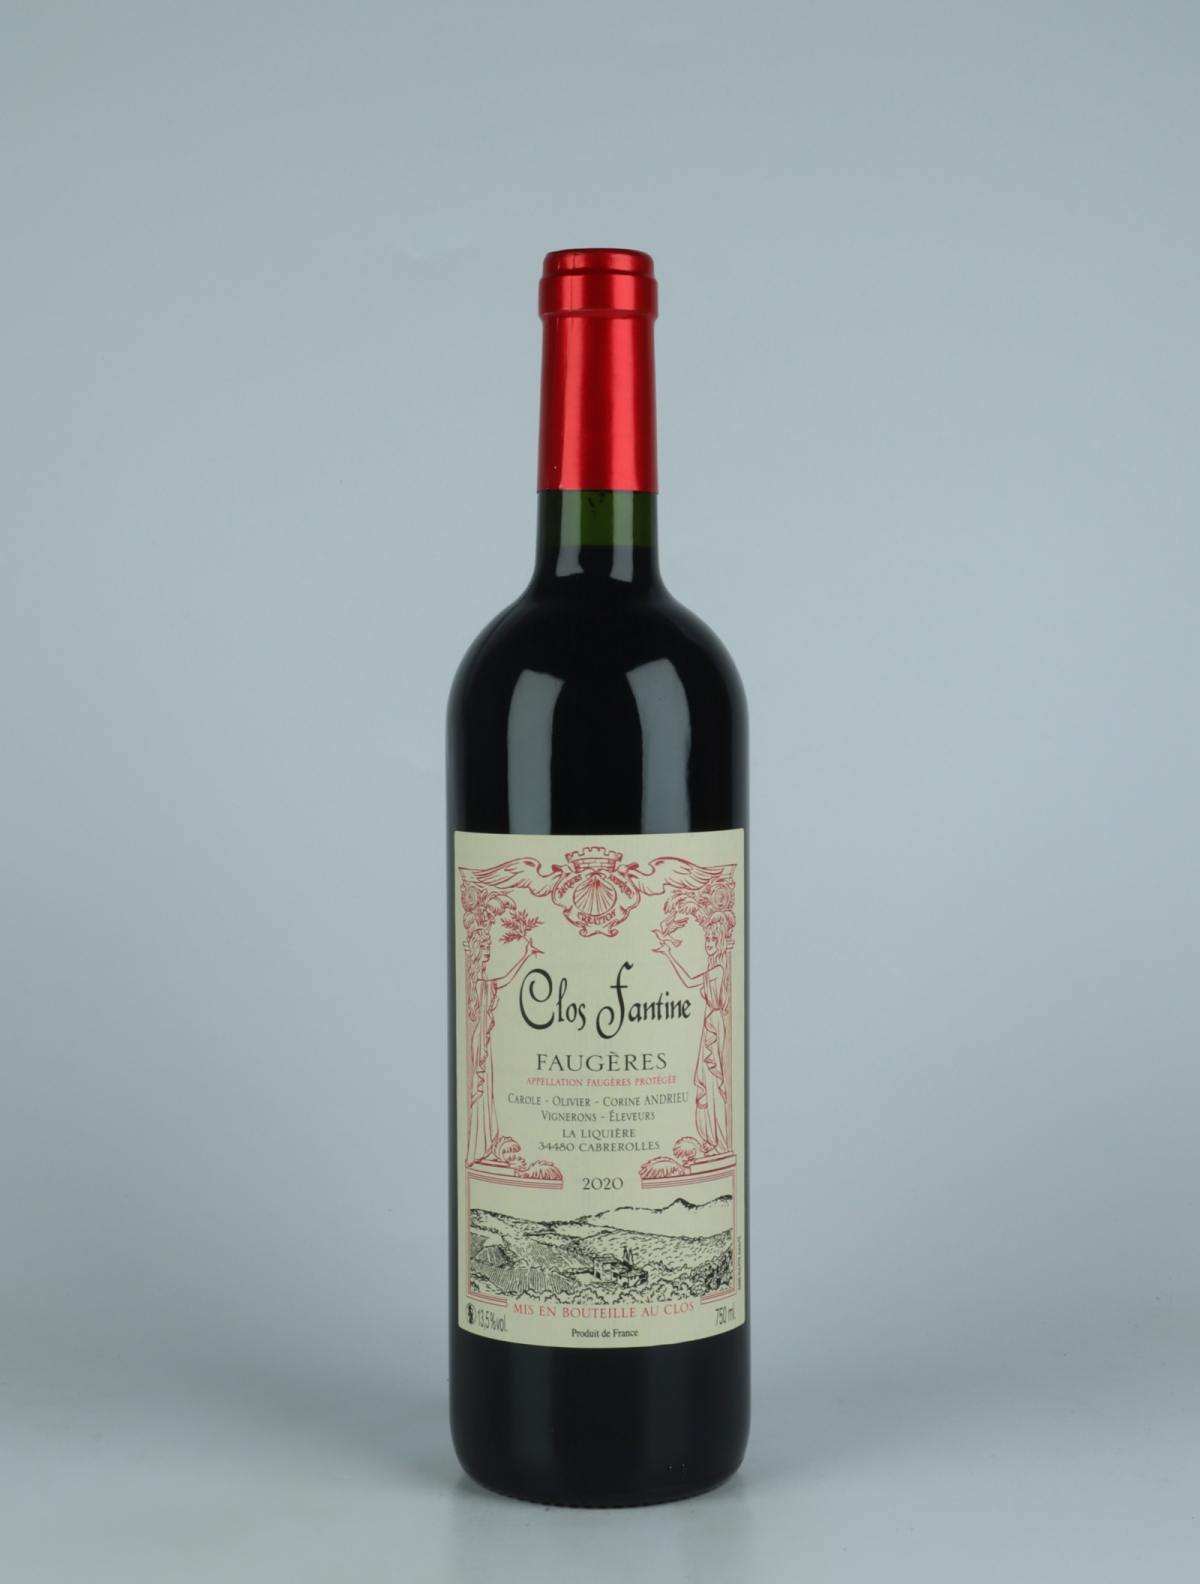 A bottle 2020 Faugères - Tradition Red wine from Clos Fantine, Languedoc in France